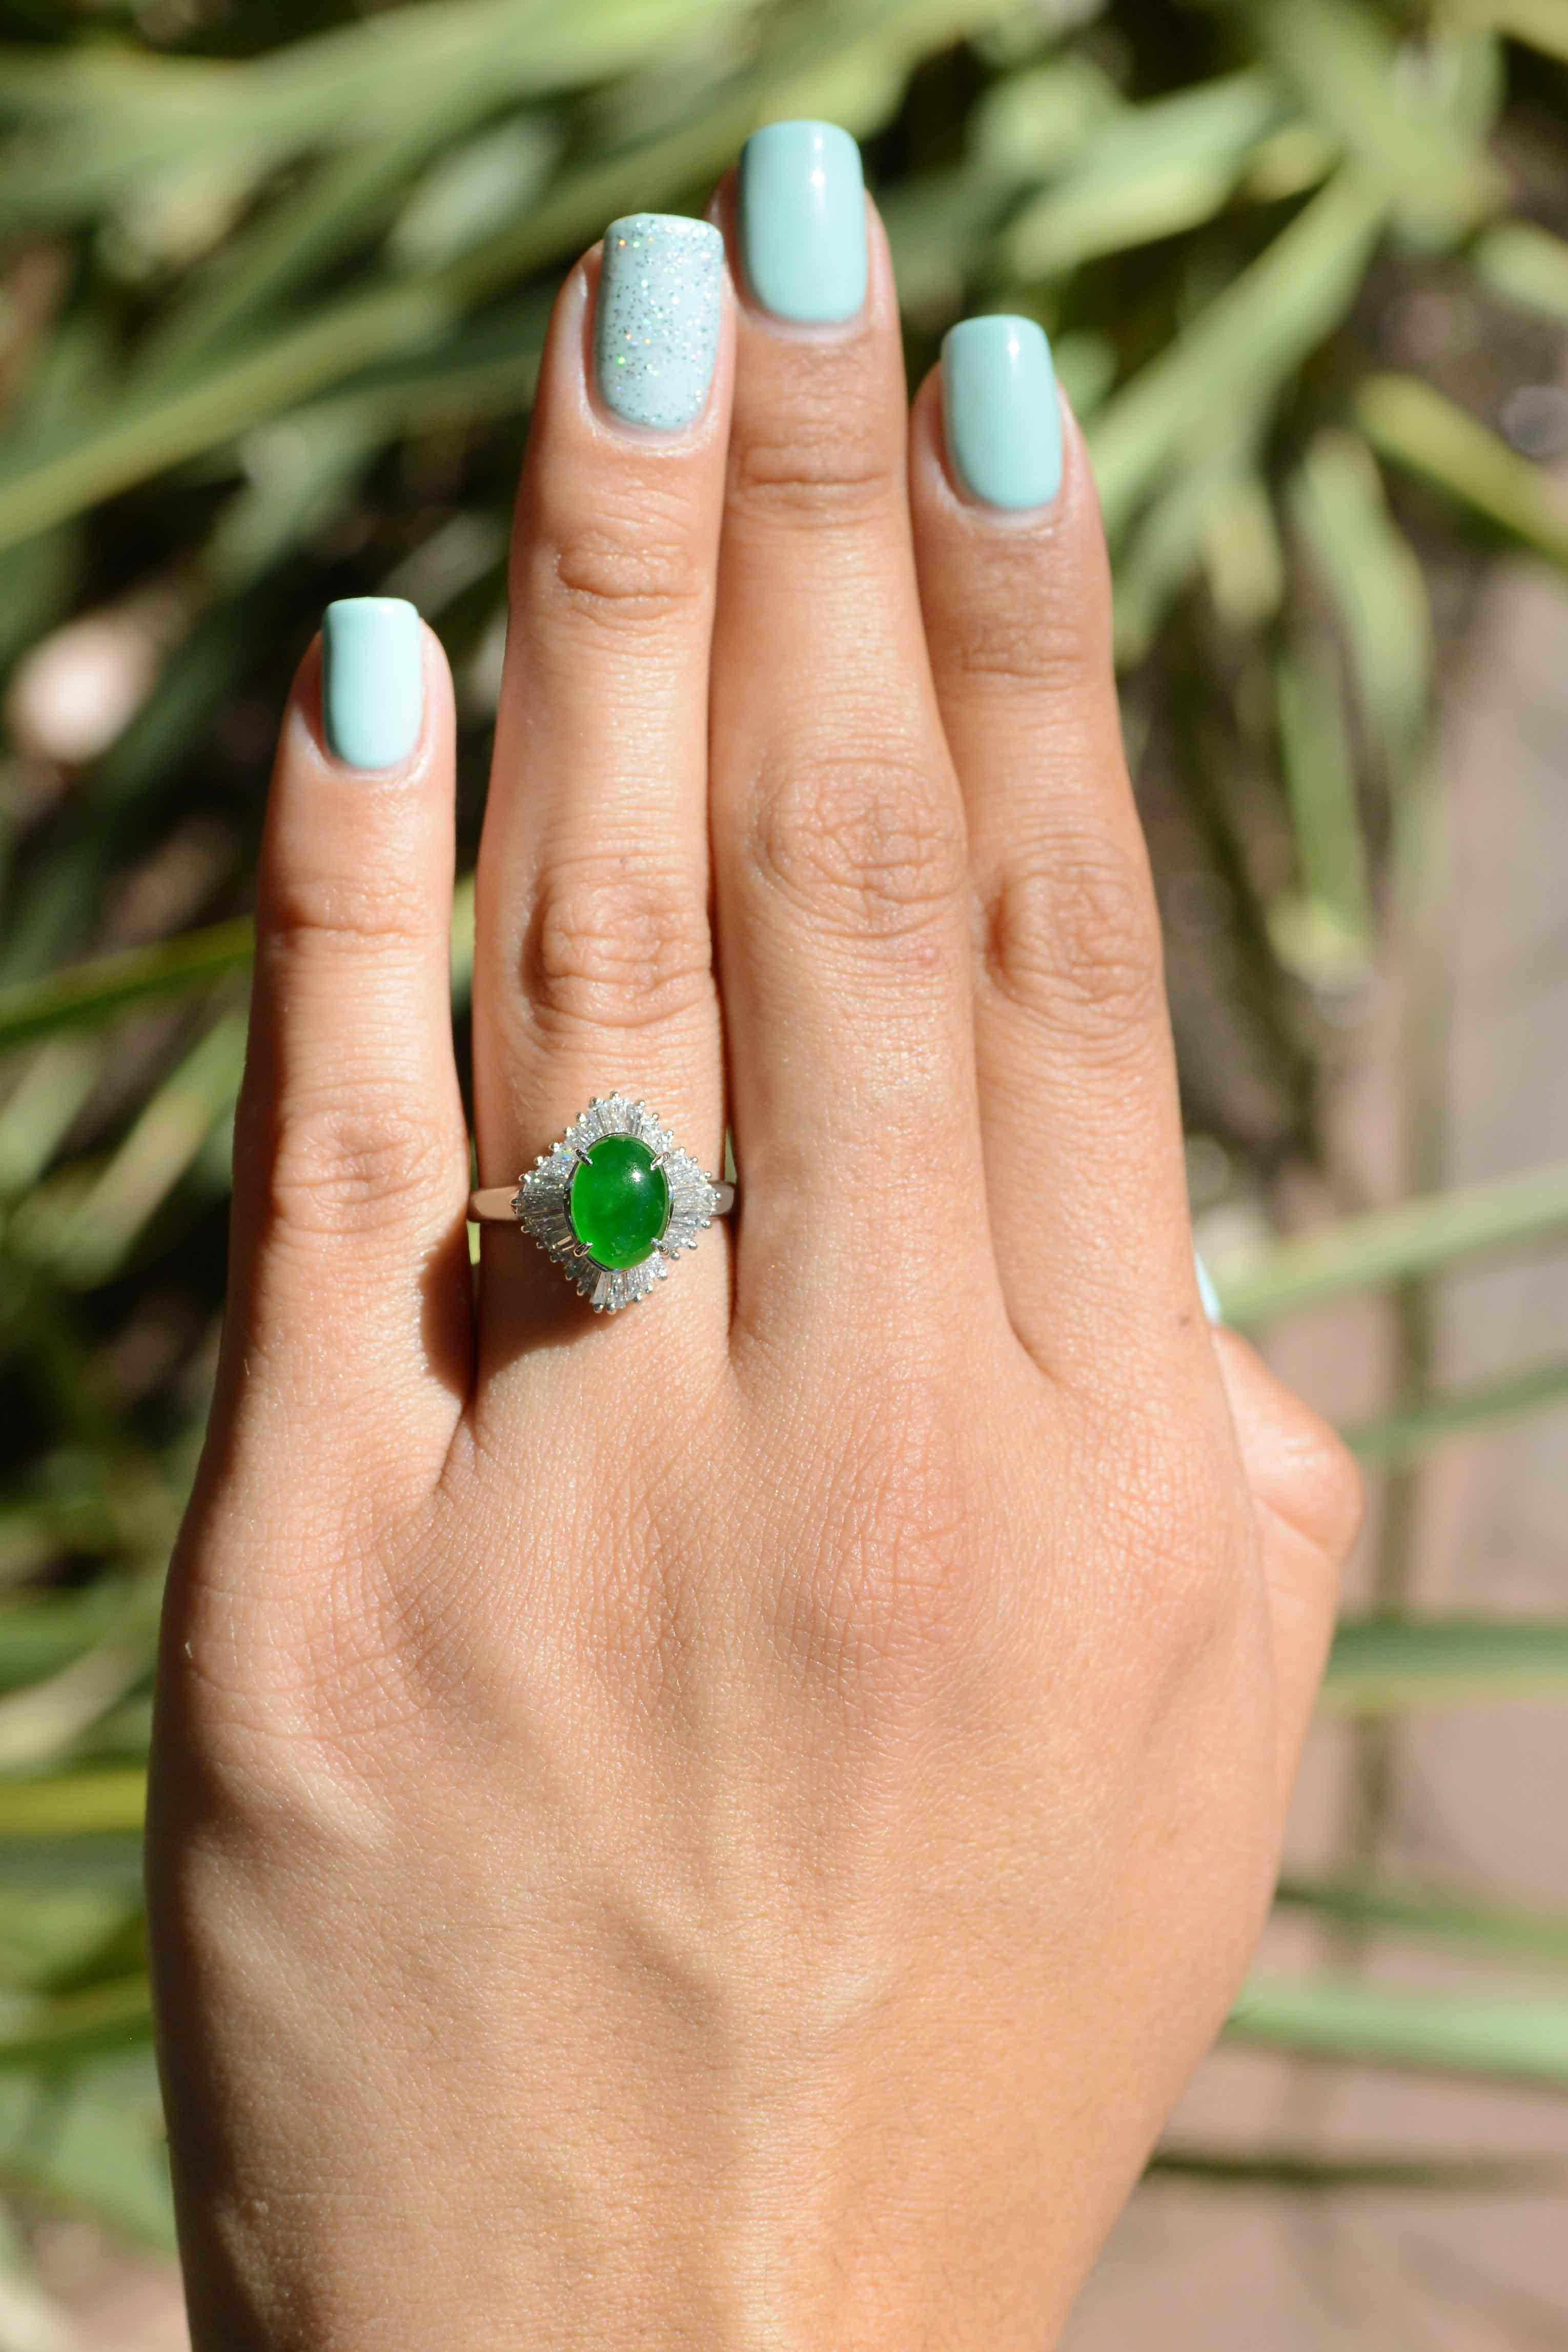 This mid century ballerina ring is an eye catching piece. This untreated, Type A  imperial jadeite has a deep, inviting, pure green color, set on a pillow of baguette diamonds that taper out from underneath it. This rare treasure is a